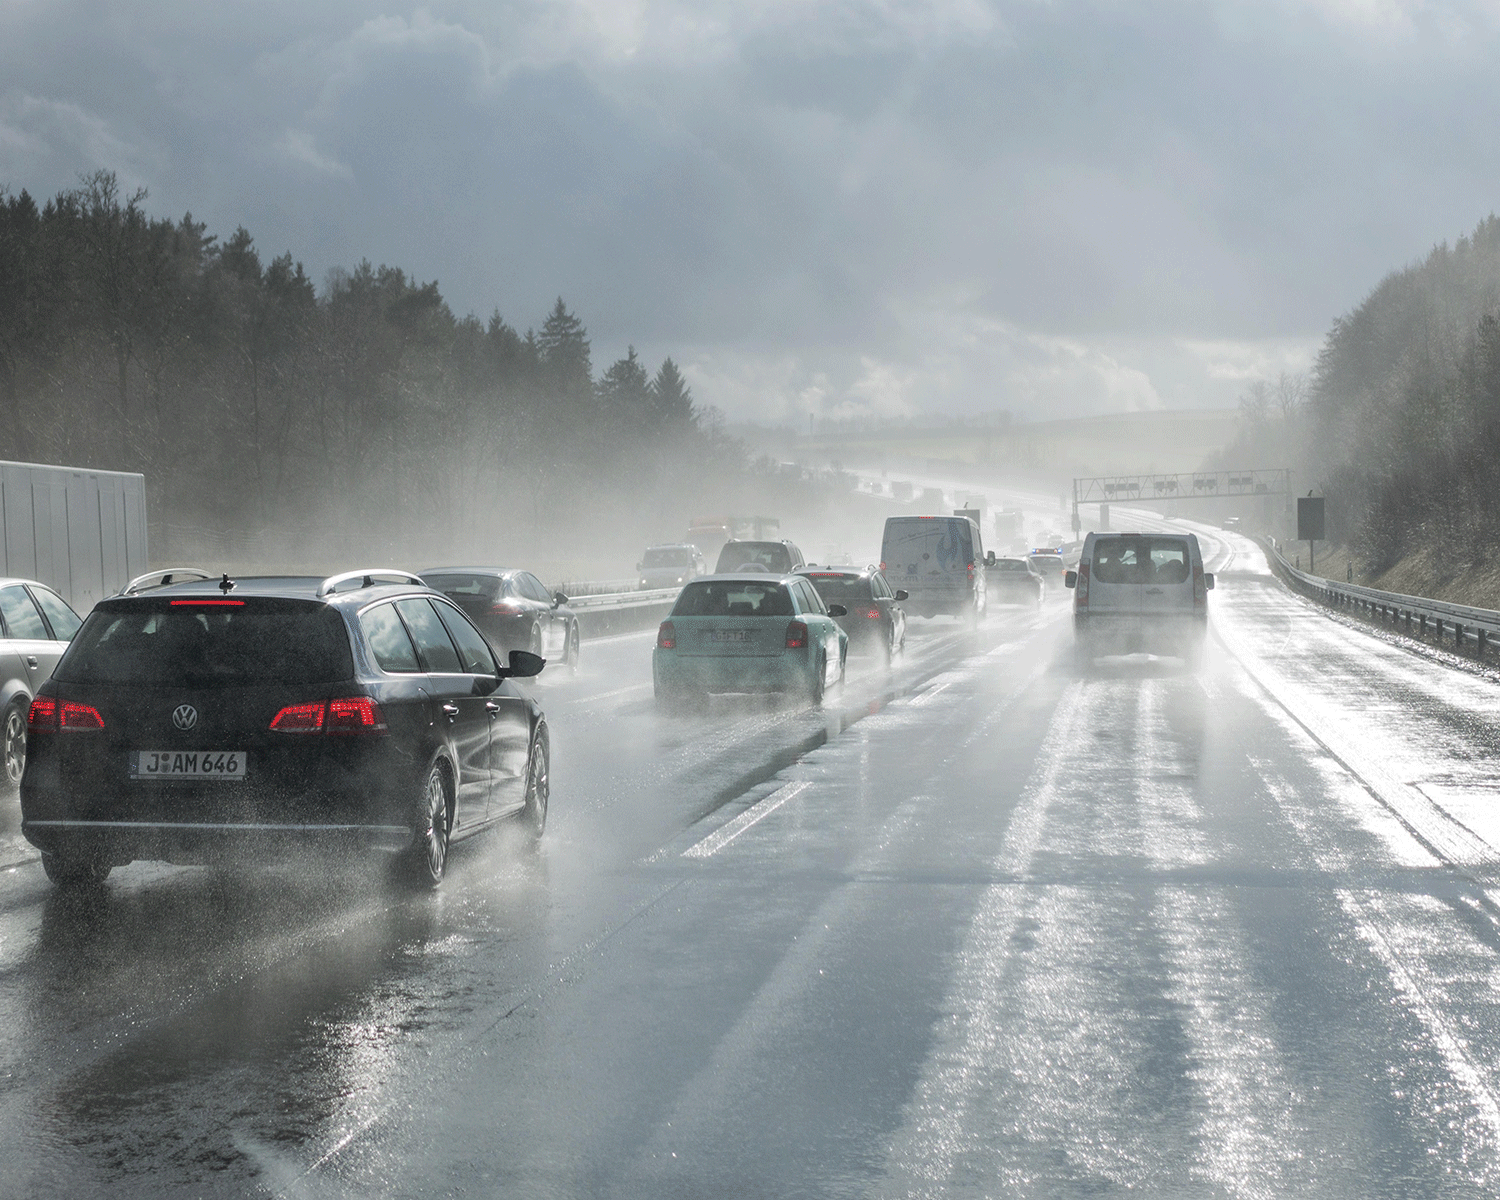 The Met Office has warned of surface water on roads as 25mm of rain is expected to fall in a short time period